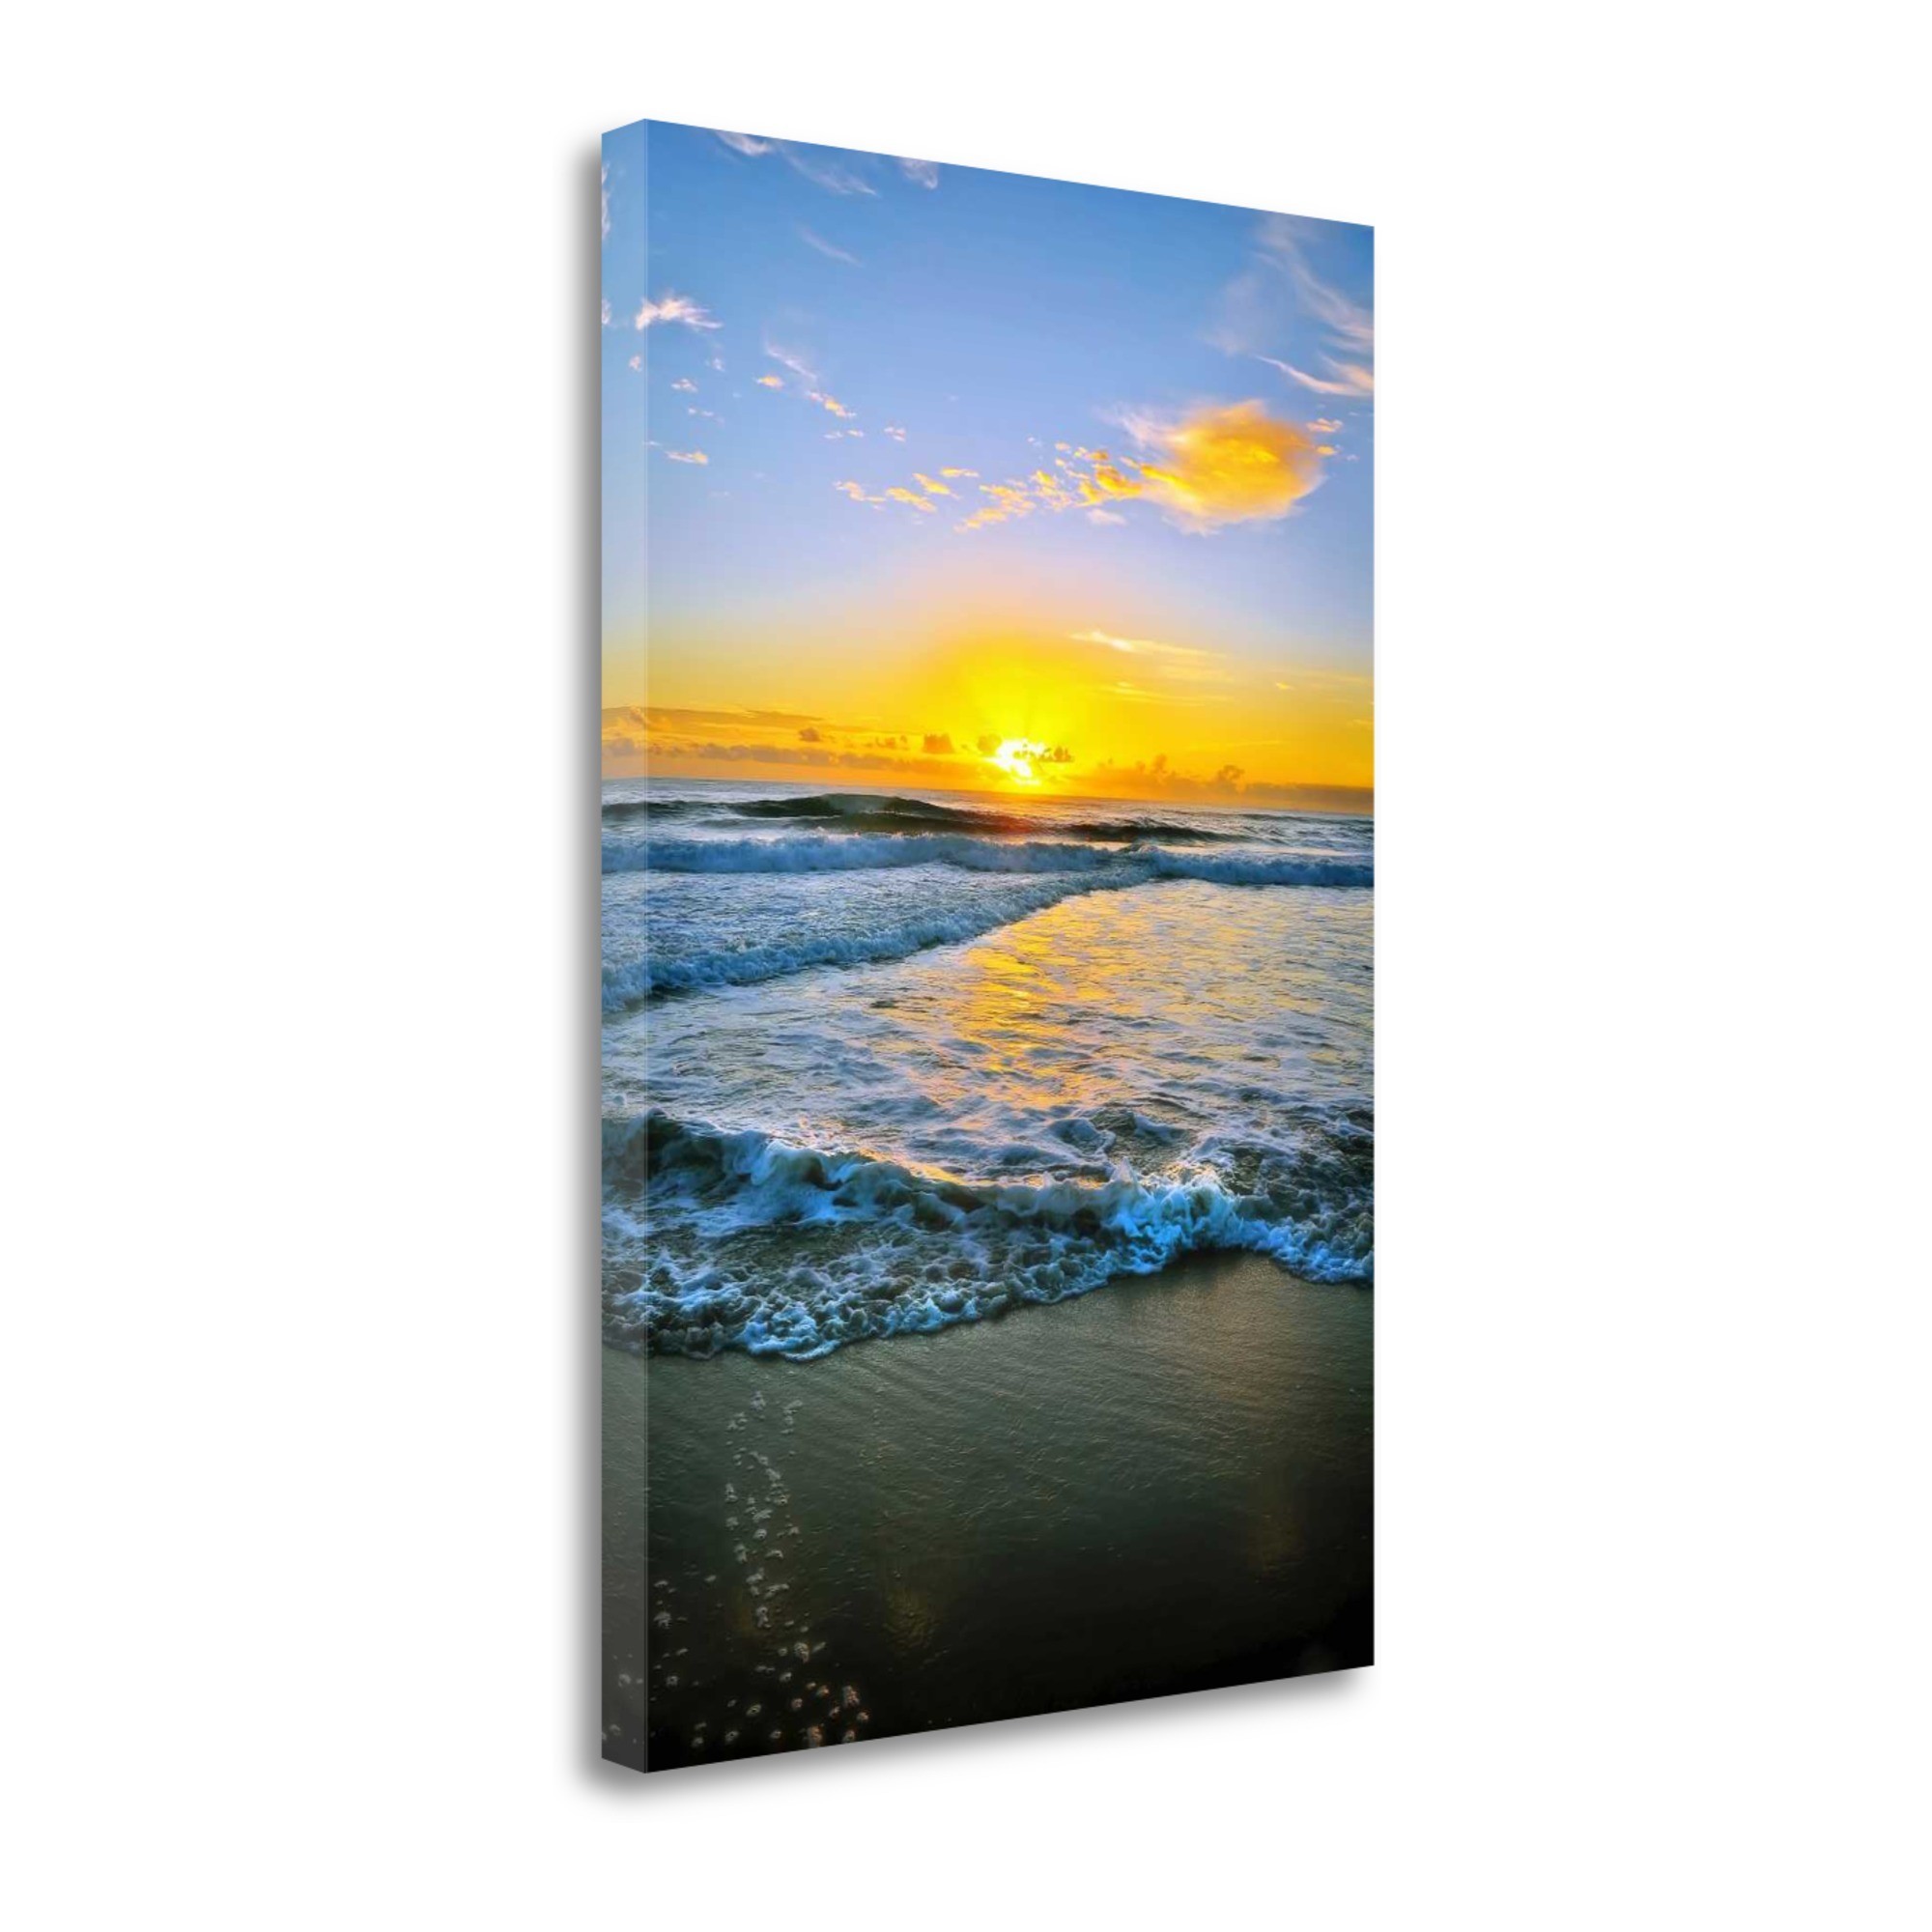 18" Beautiful and Vibrant Sunset at the Beach Giclee Wrap Canvas Wall Art